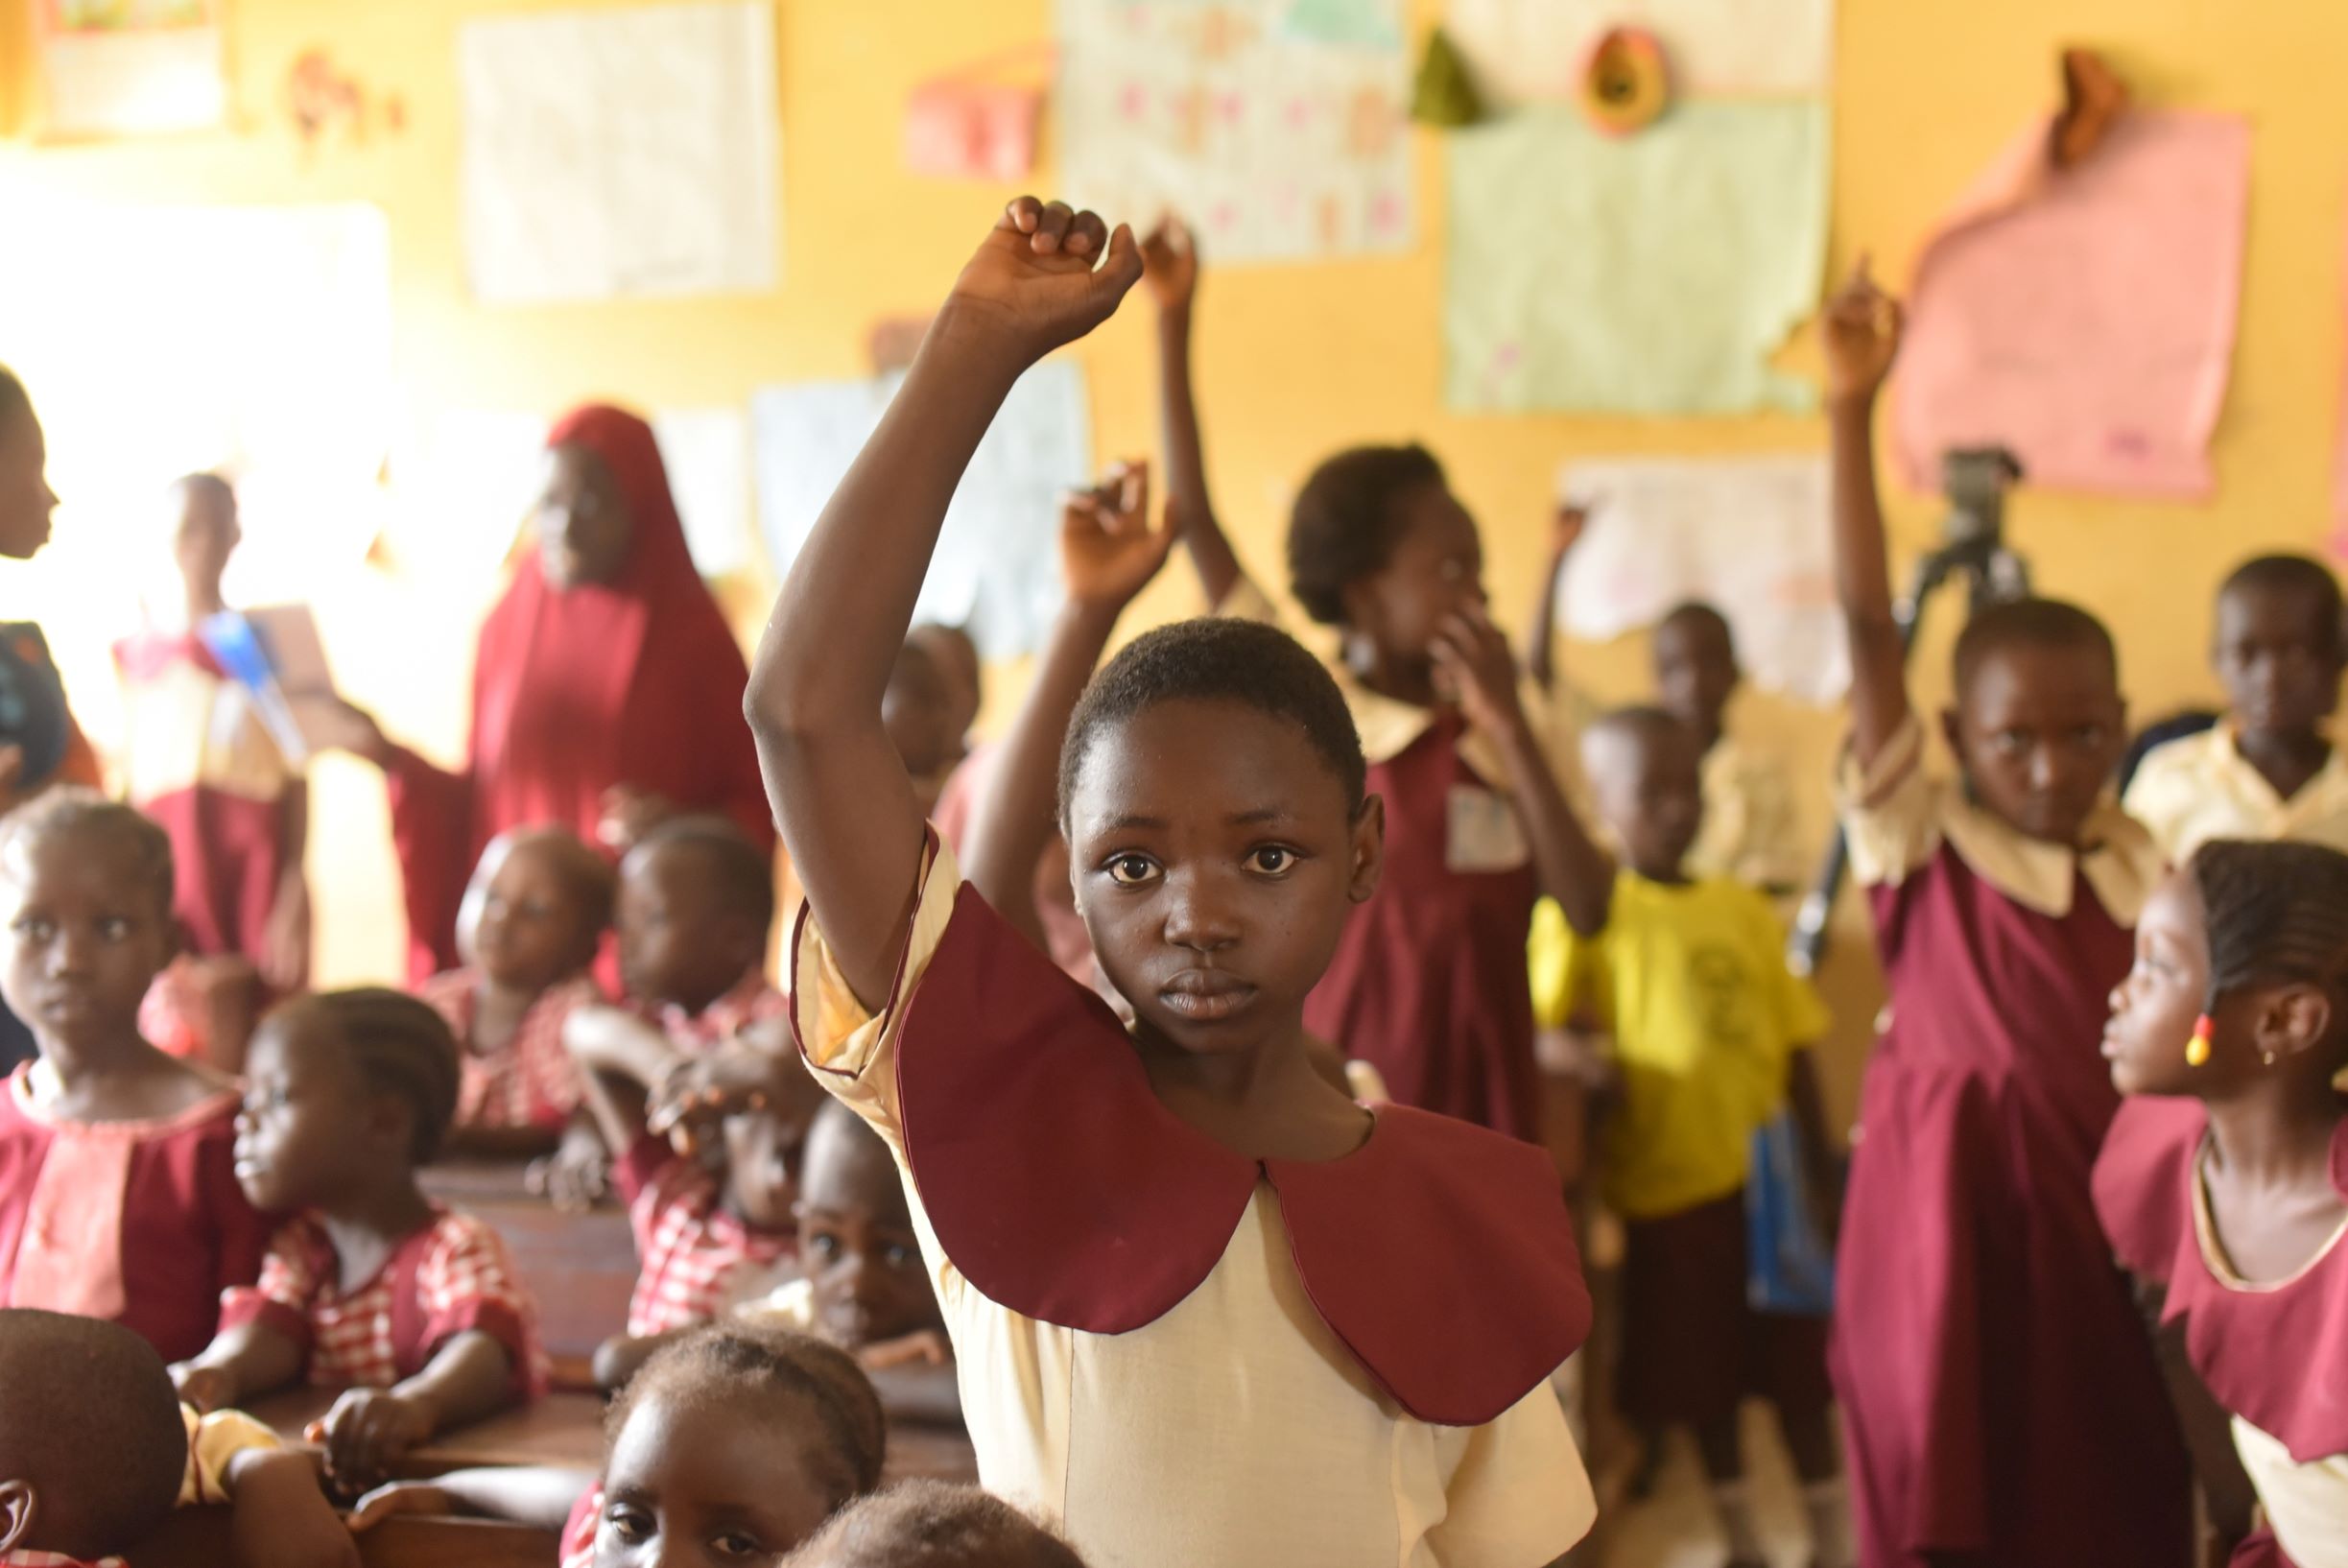 Education in emergency in Nigeria: Creating gender equitable policies so all girls have an uninterrupted right to learn | Speevr